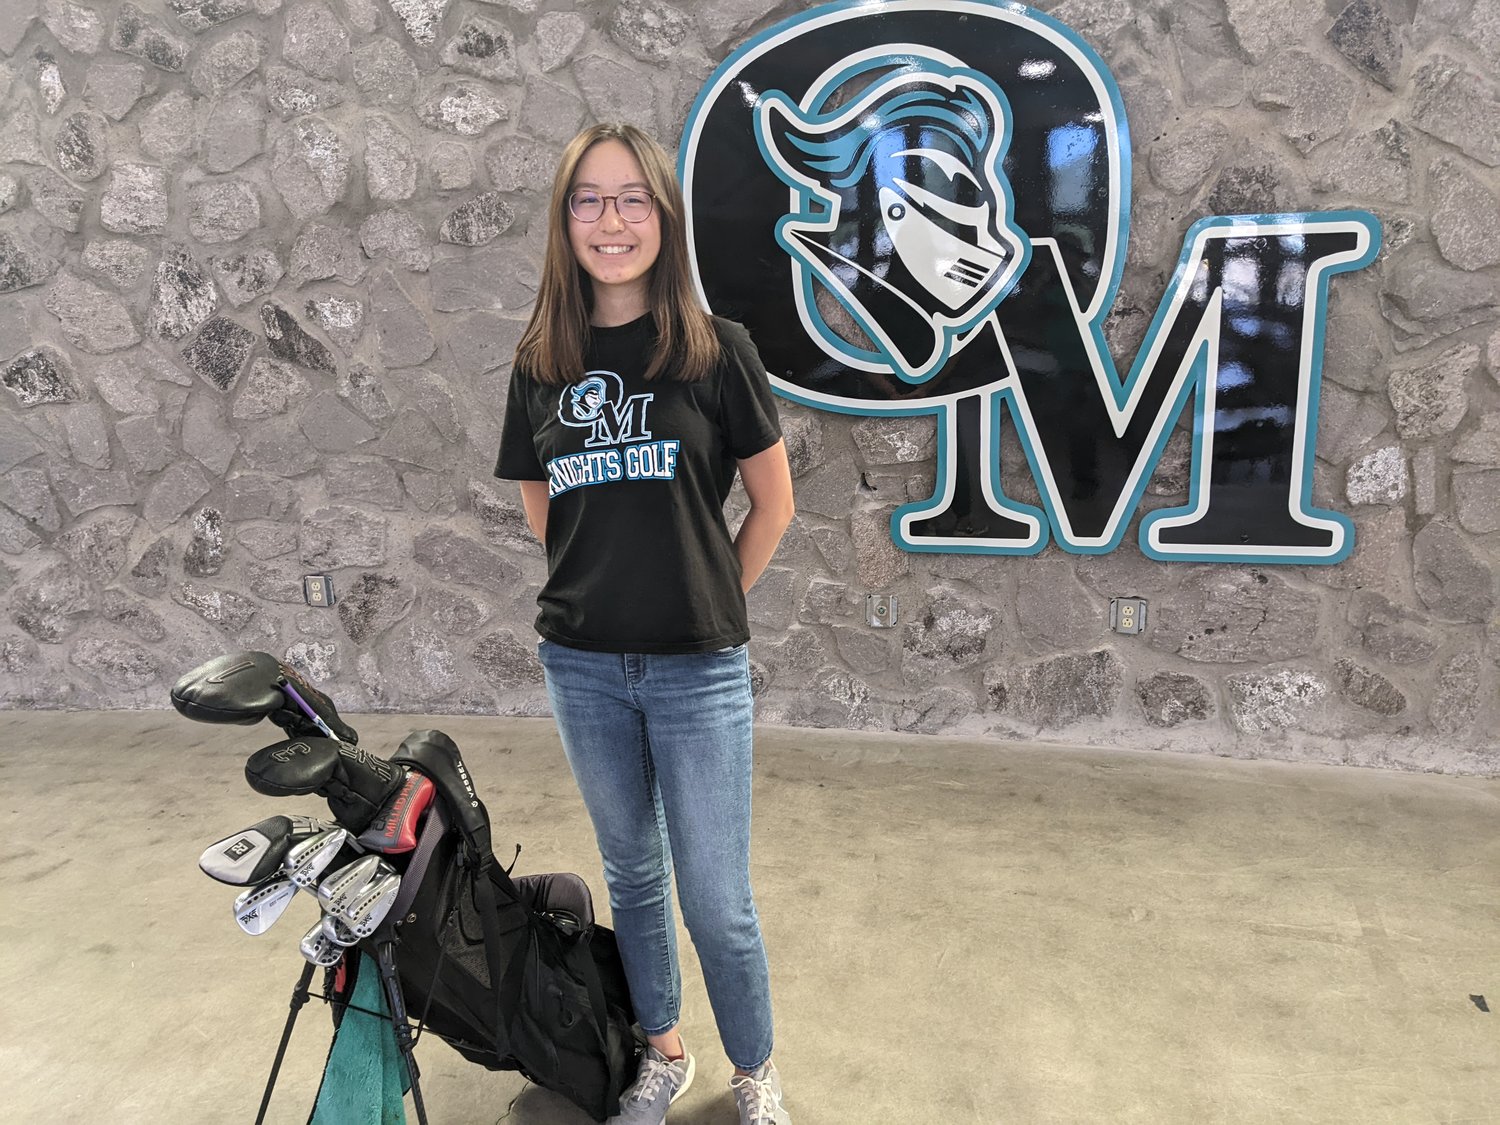 Eleanor Warden, an eighth-grader golfing for Organ Mountain High, won the state 5A girls golf championship in May.